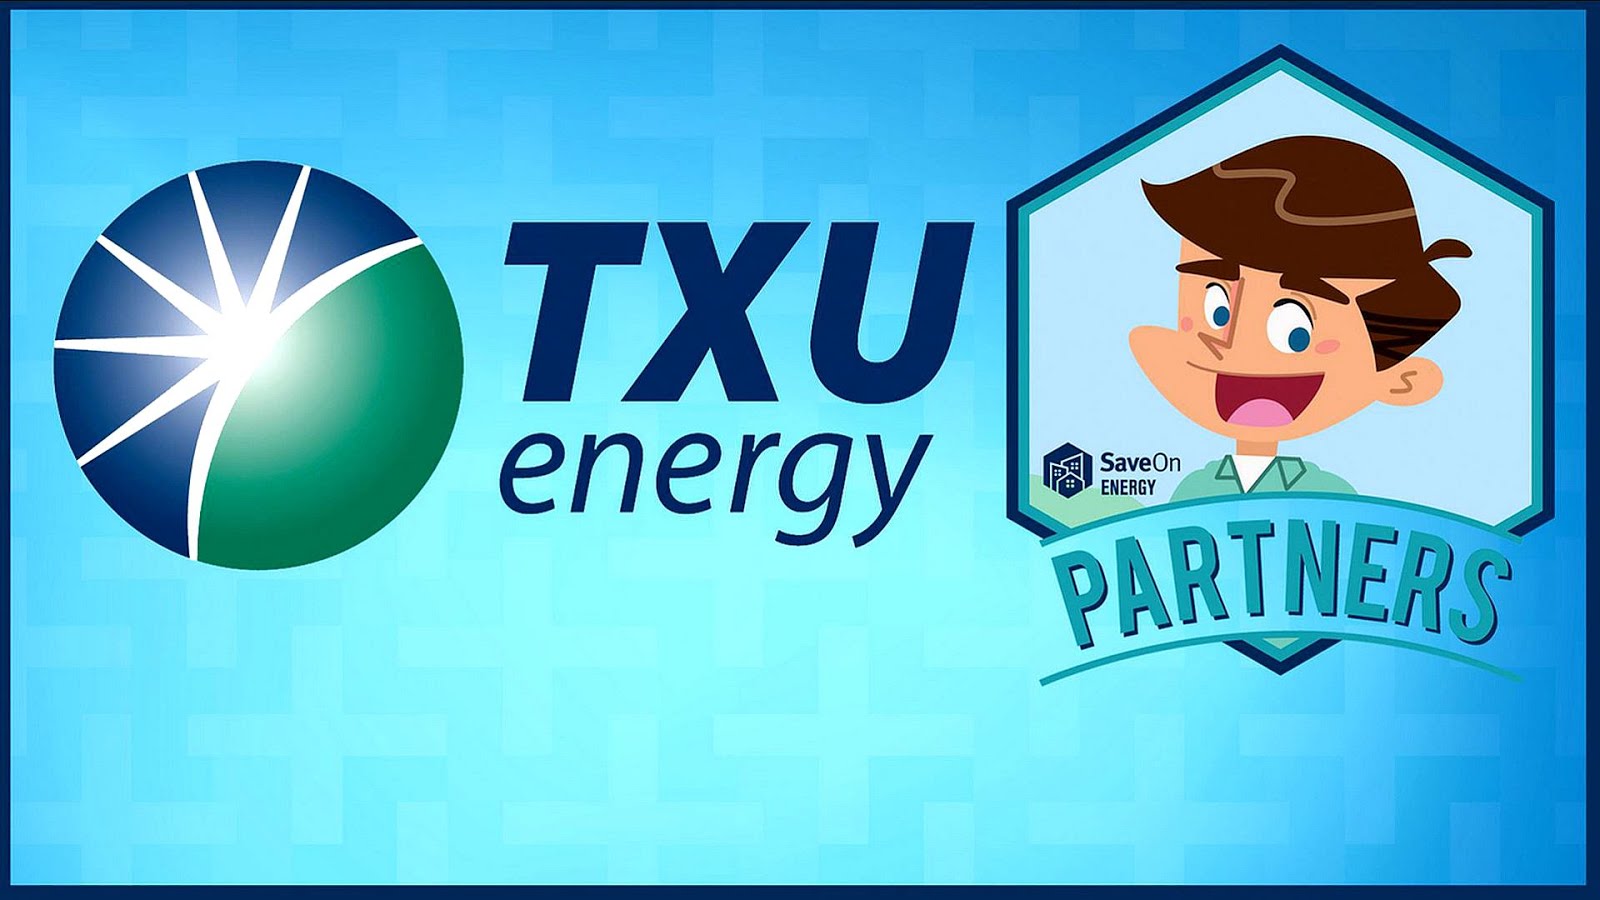 txu-energy-pay-bill-phone-number-energy-choices